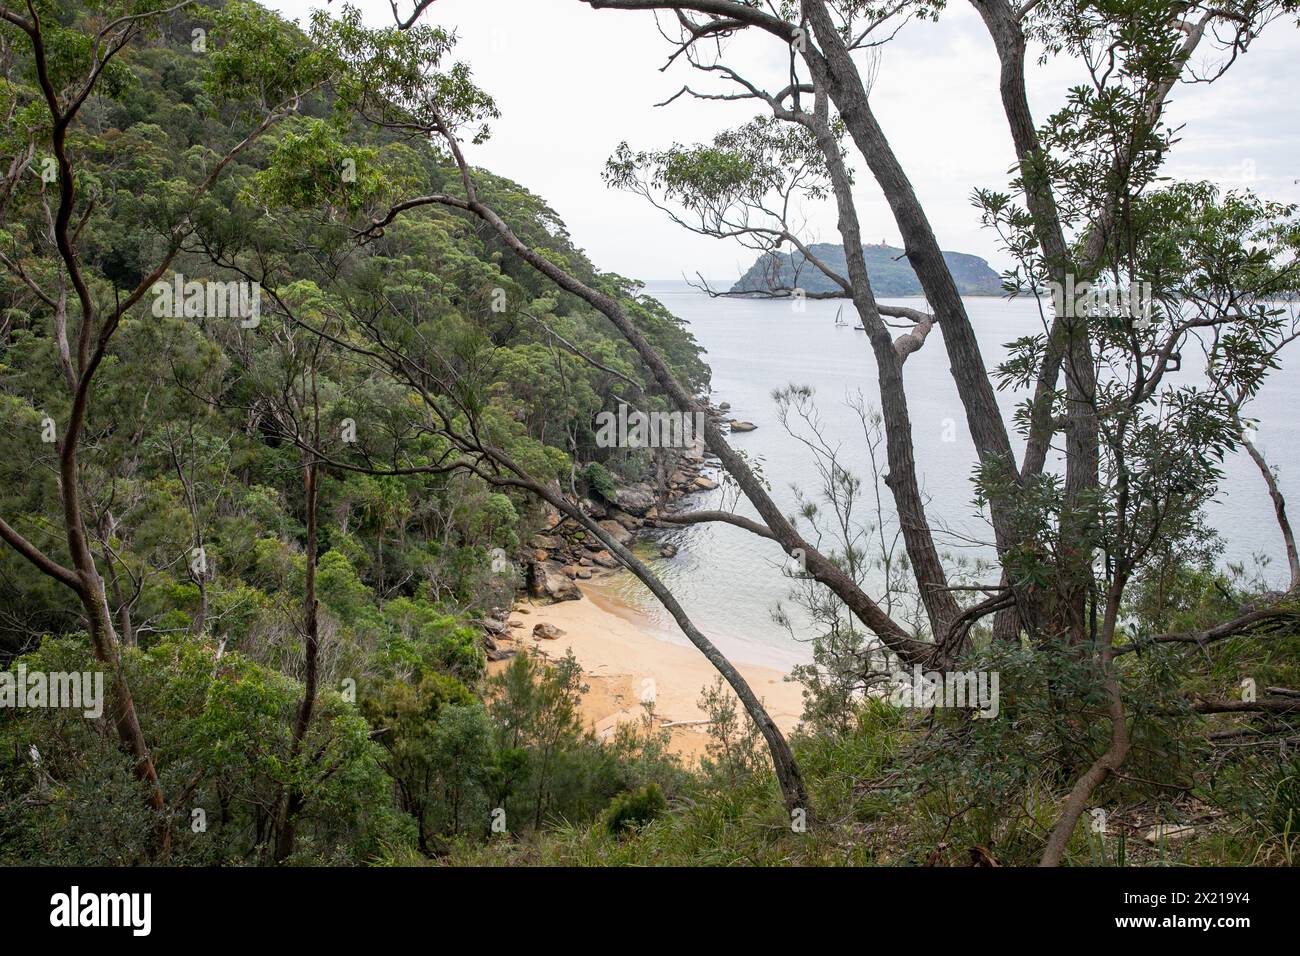 Ku-ring-gai chase national park, view down to Resolute Beach on the Pittwater coast, with views towards Barrenjoey headland and peninsula,Australia Stock Photo